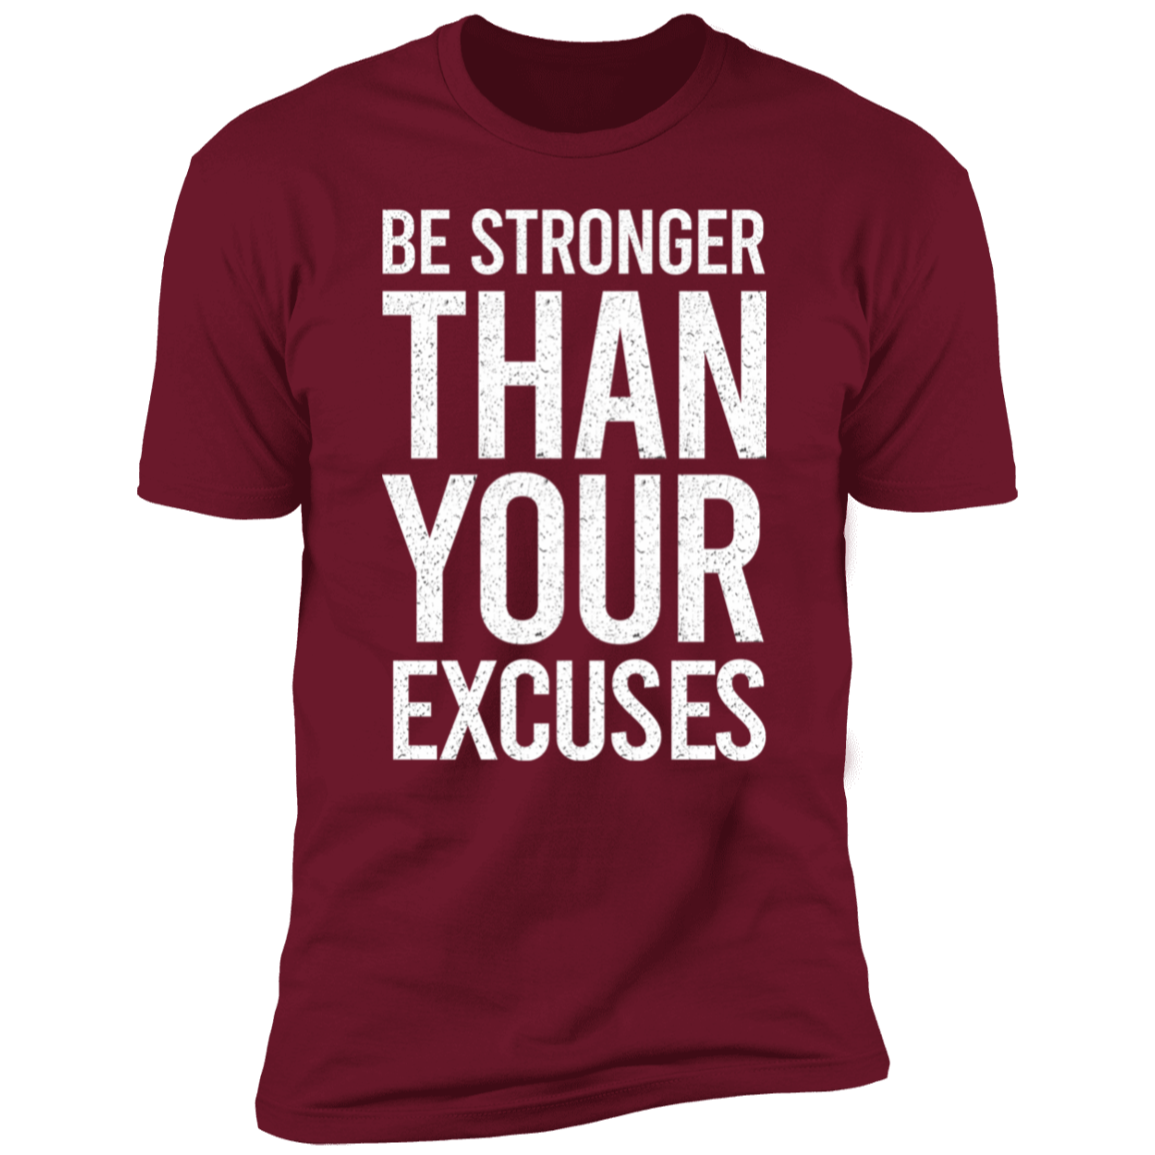 Be Stronger Than Your Excuses Premium Short Sleeve T-Shirt - Game Day Getup